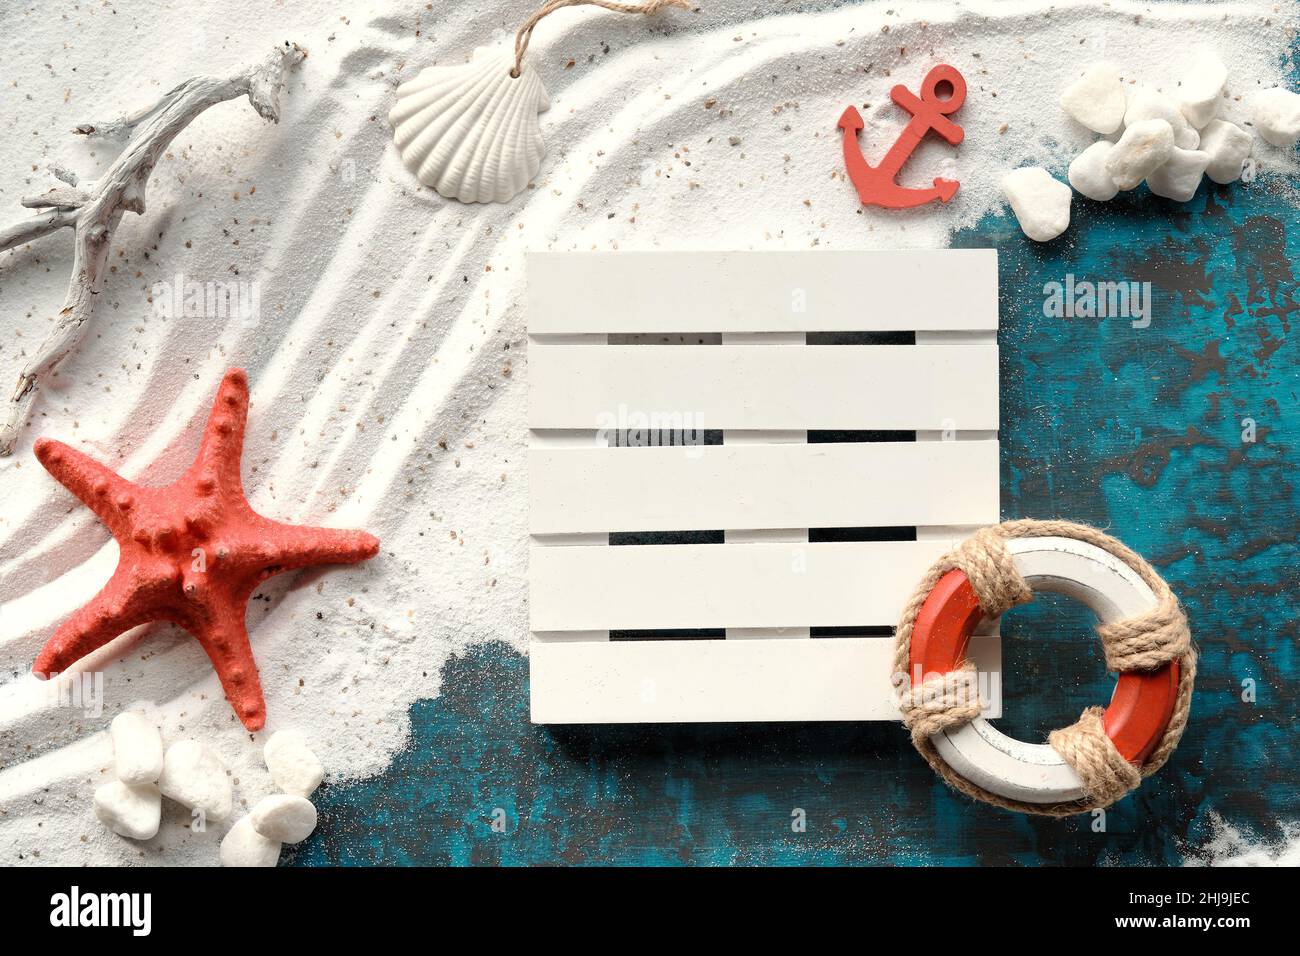 Sand and sea background. White sand on turquoise blue with pebbles, red starfish, anchor, safe ring. Stock Photo